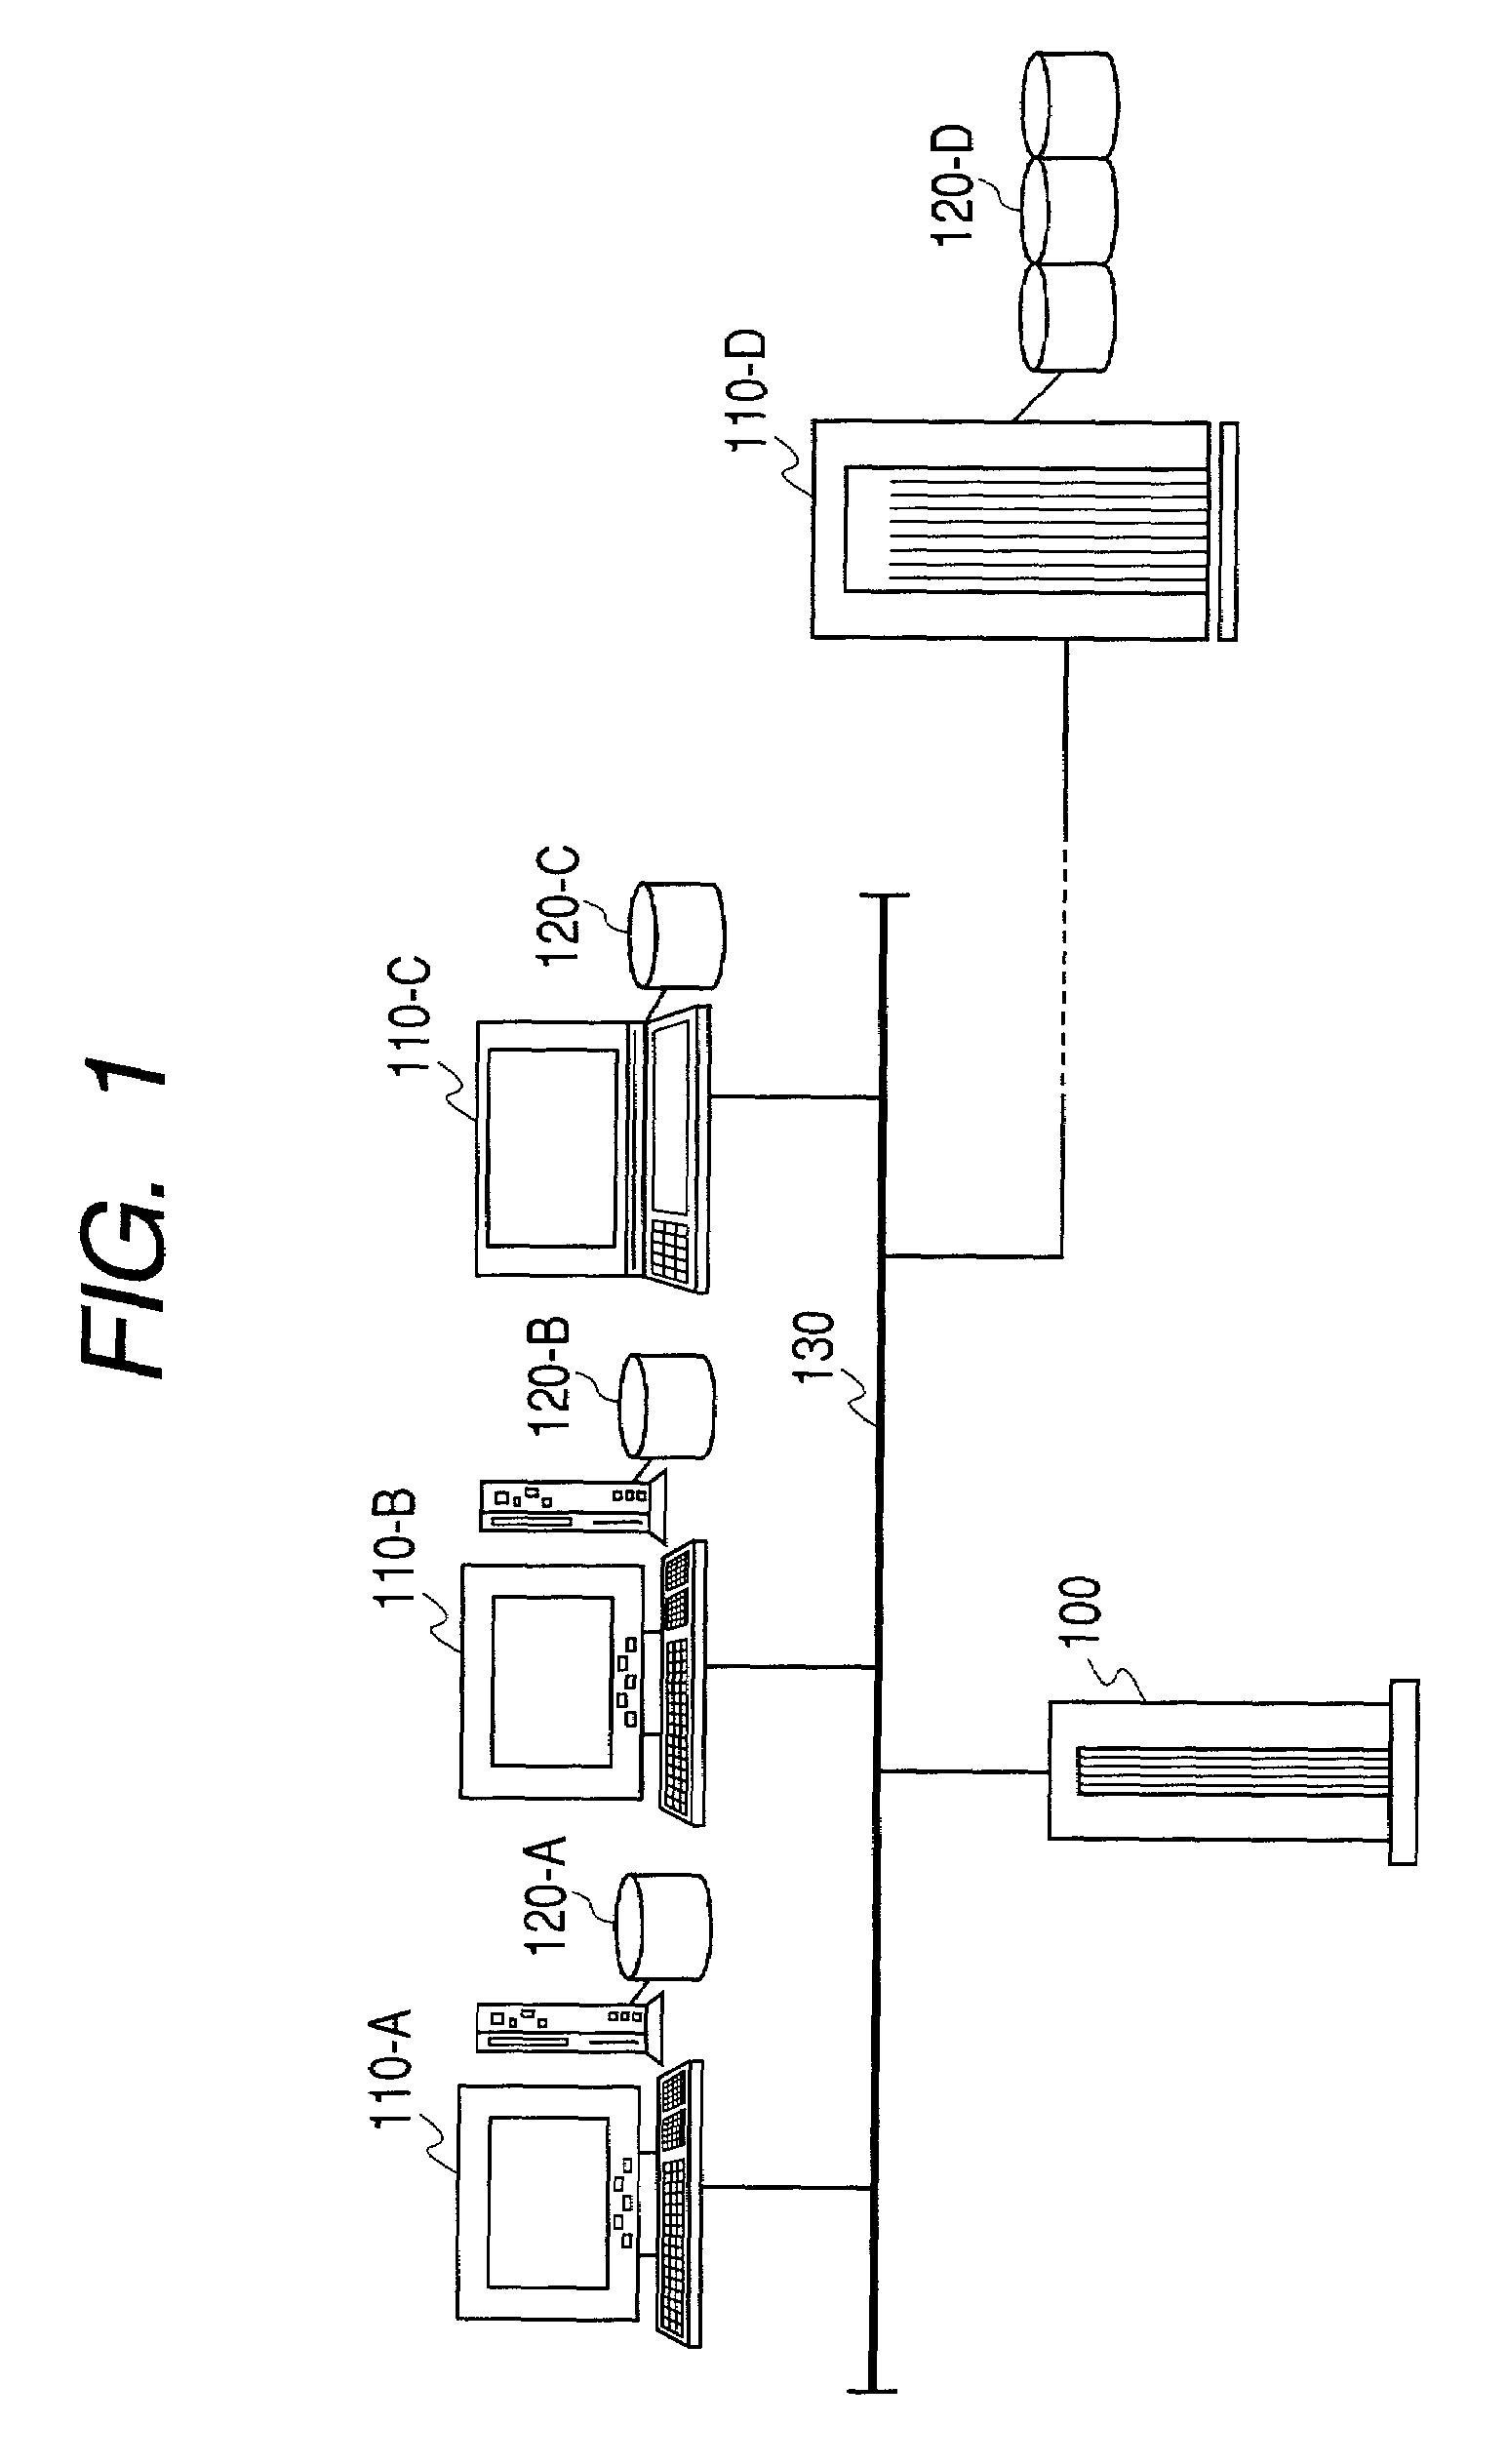 Storage management integrated system and storage control method for storage management integrated system